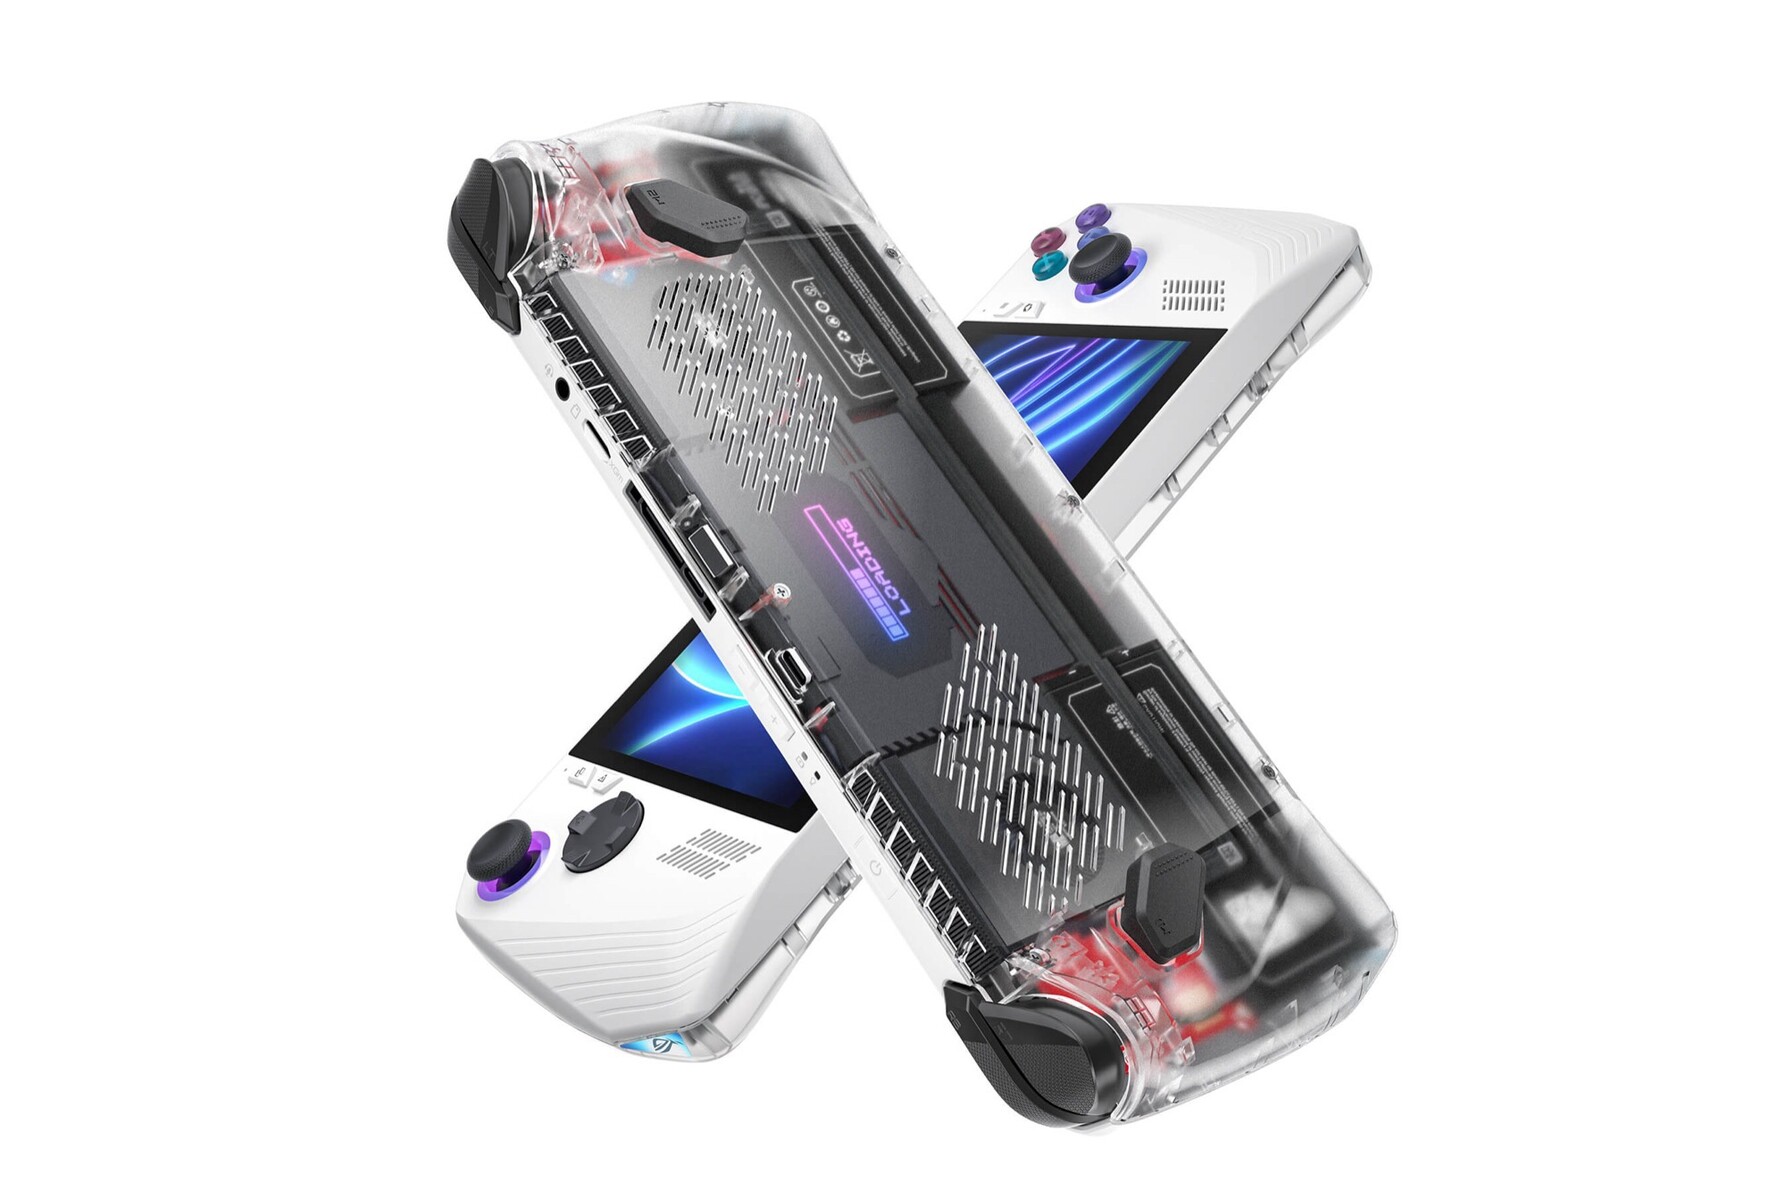 JSAUX ROG Ally Carrying Case To Protect Your ROG Ally